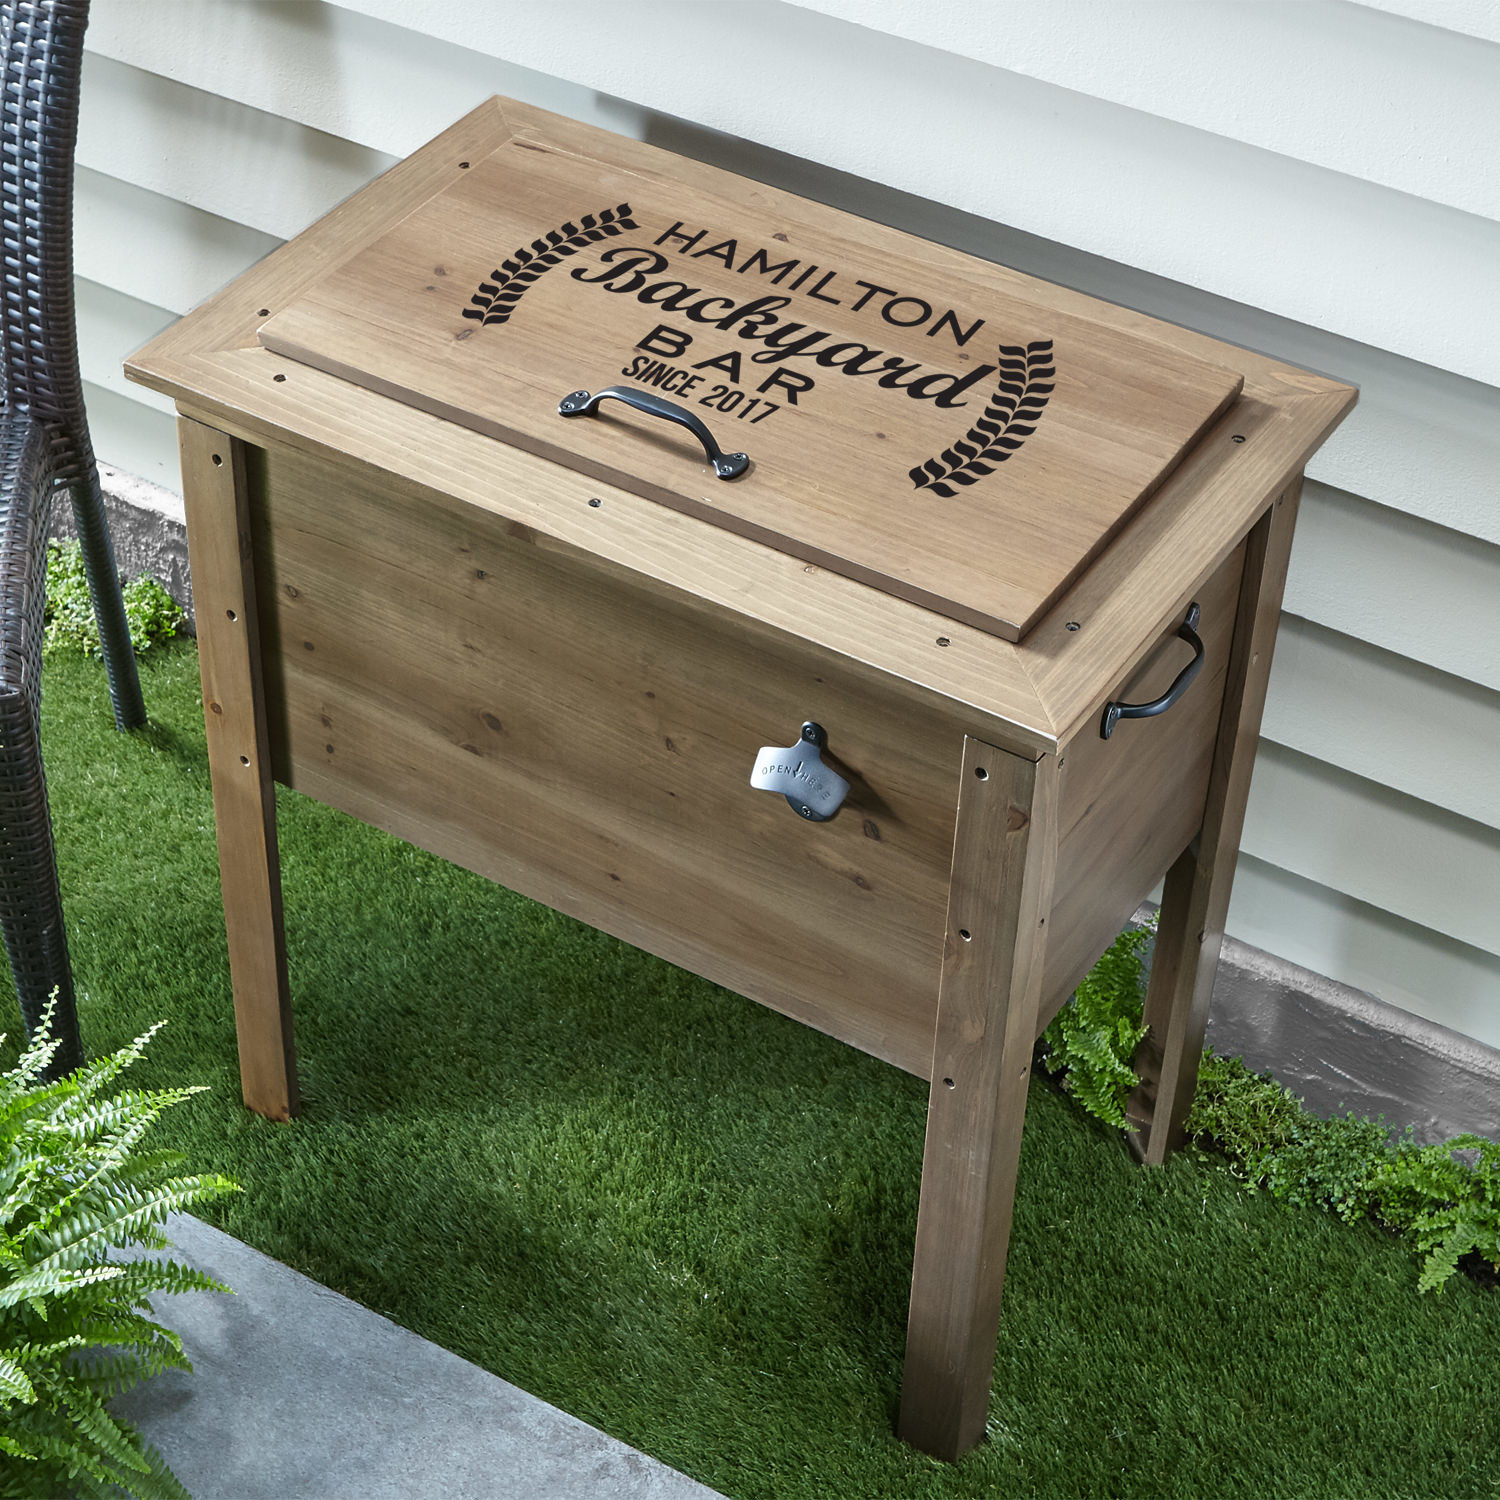 the wooden personalized beverage cooler